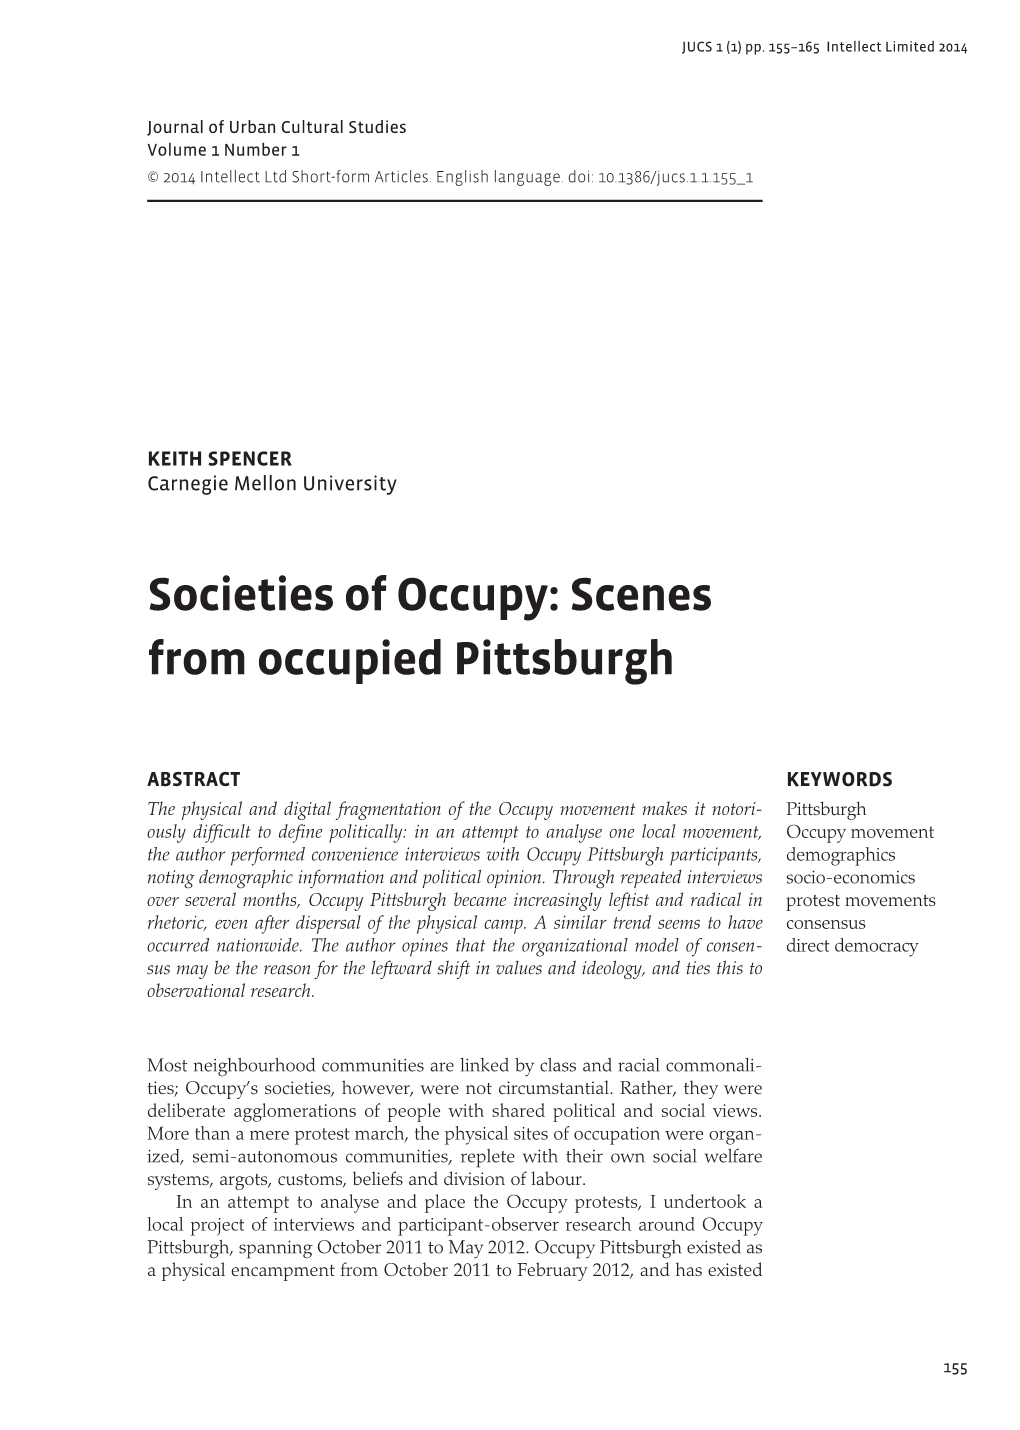 Societies of Occupy: Scenes from Occupied Pittsburgh